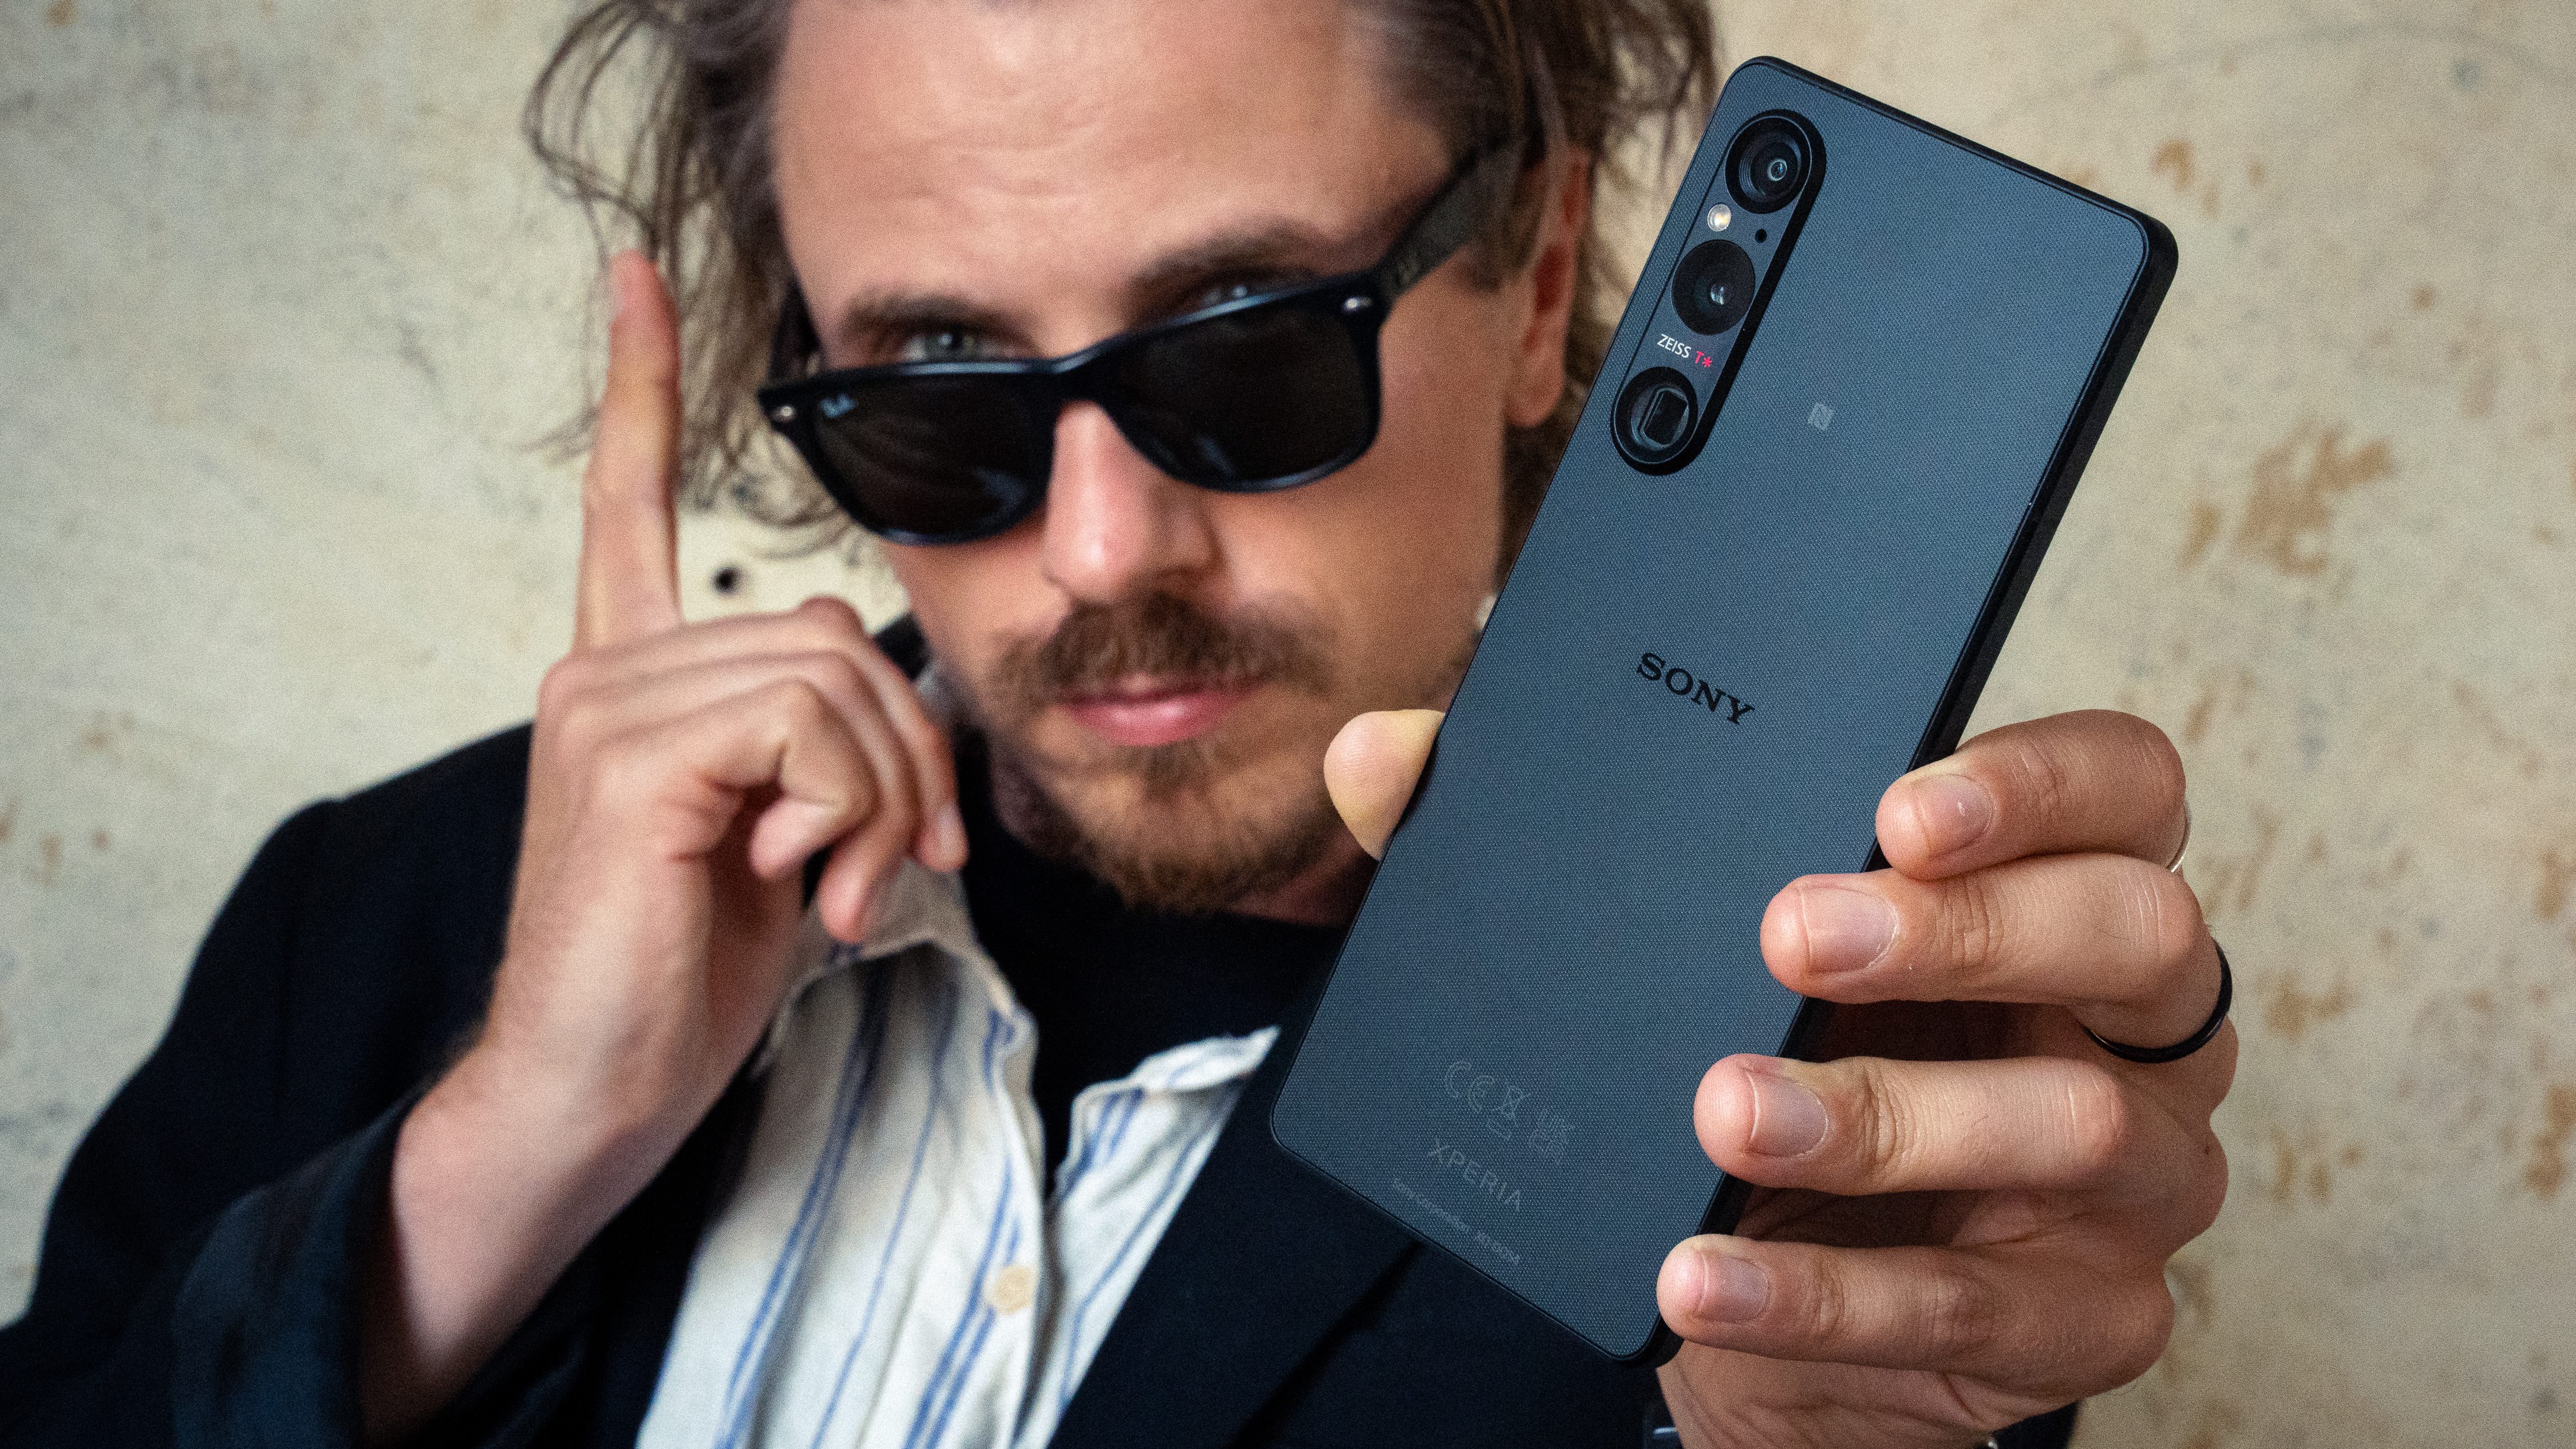 Sony Xperia 1 V review: Sony tweaks its unique pro-phone formula